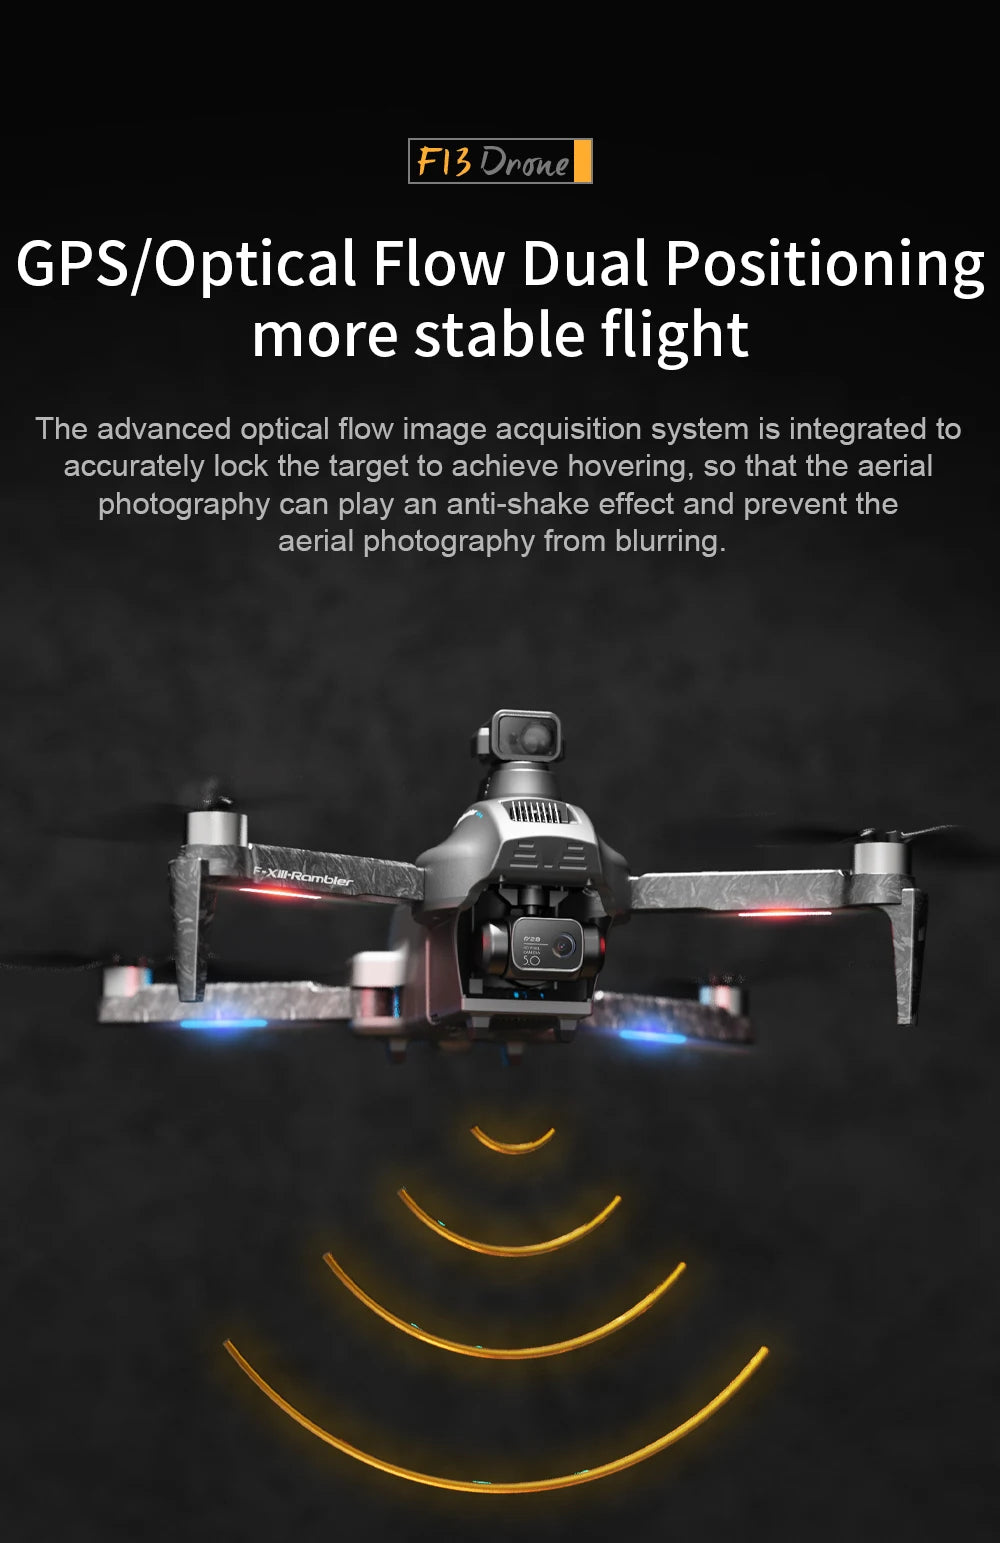 4DRC F13 - GPS Drone, GPS/Optical Flow Dual Positioning more stable flight .